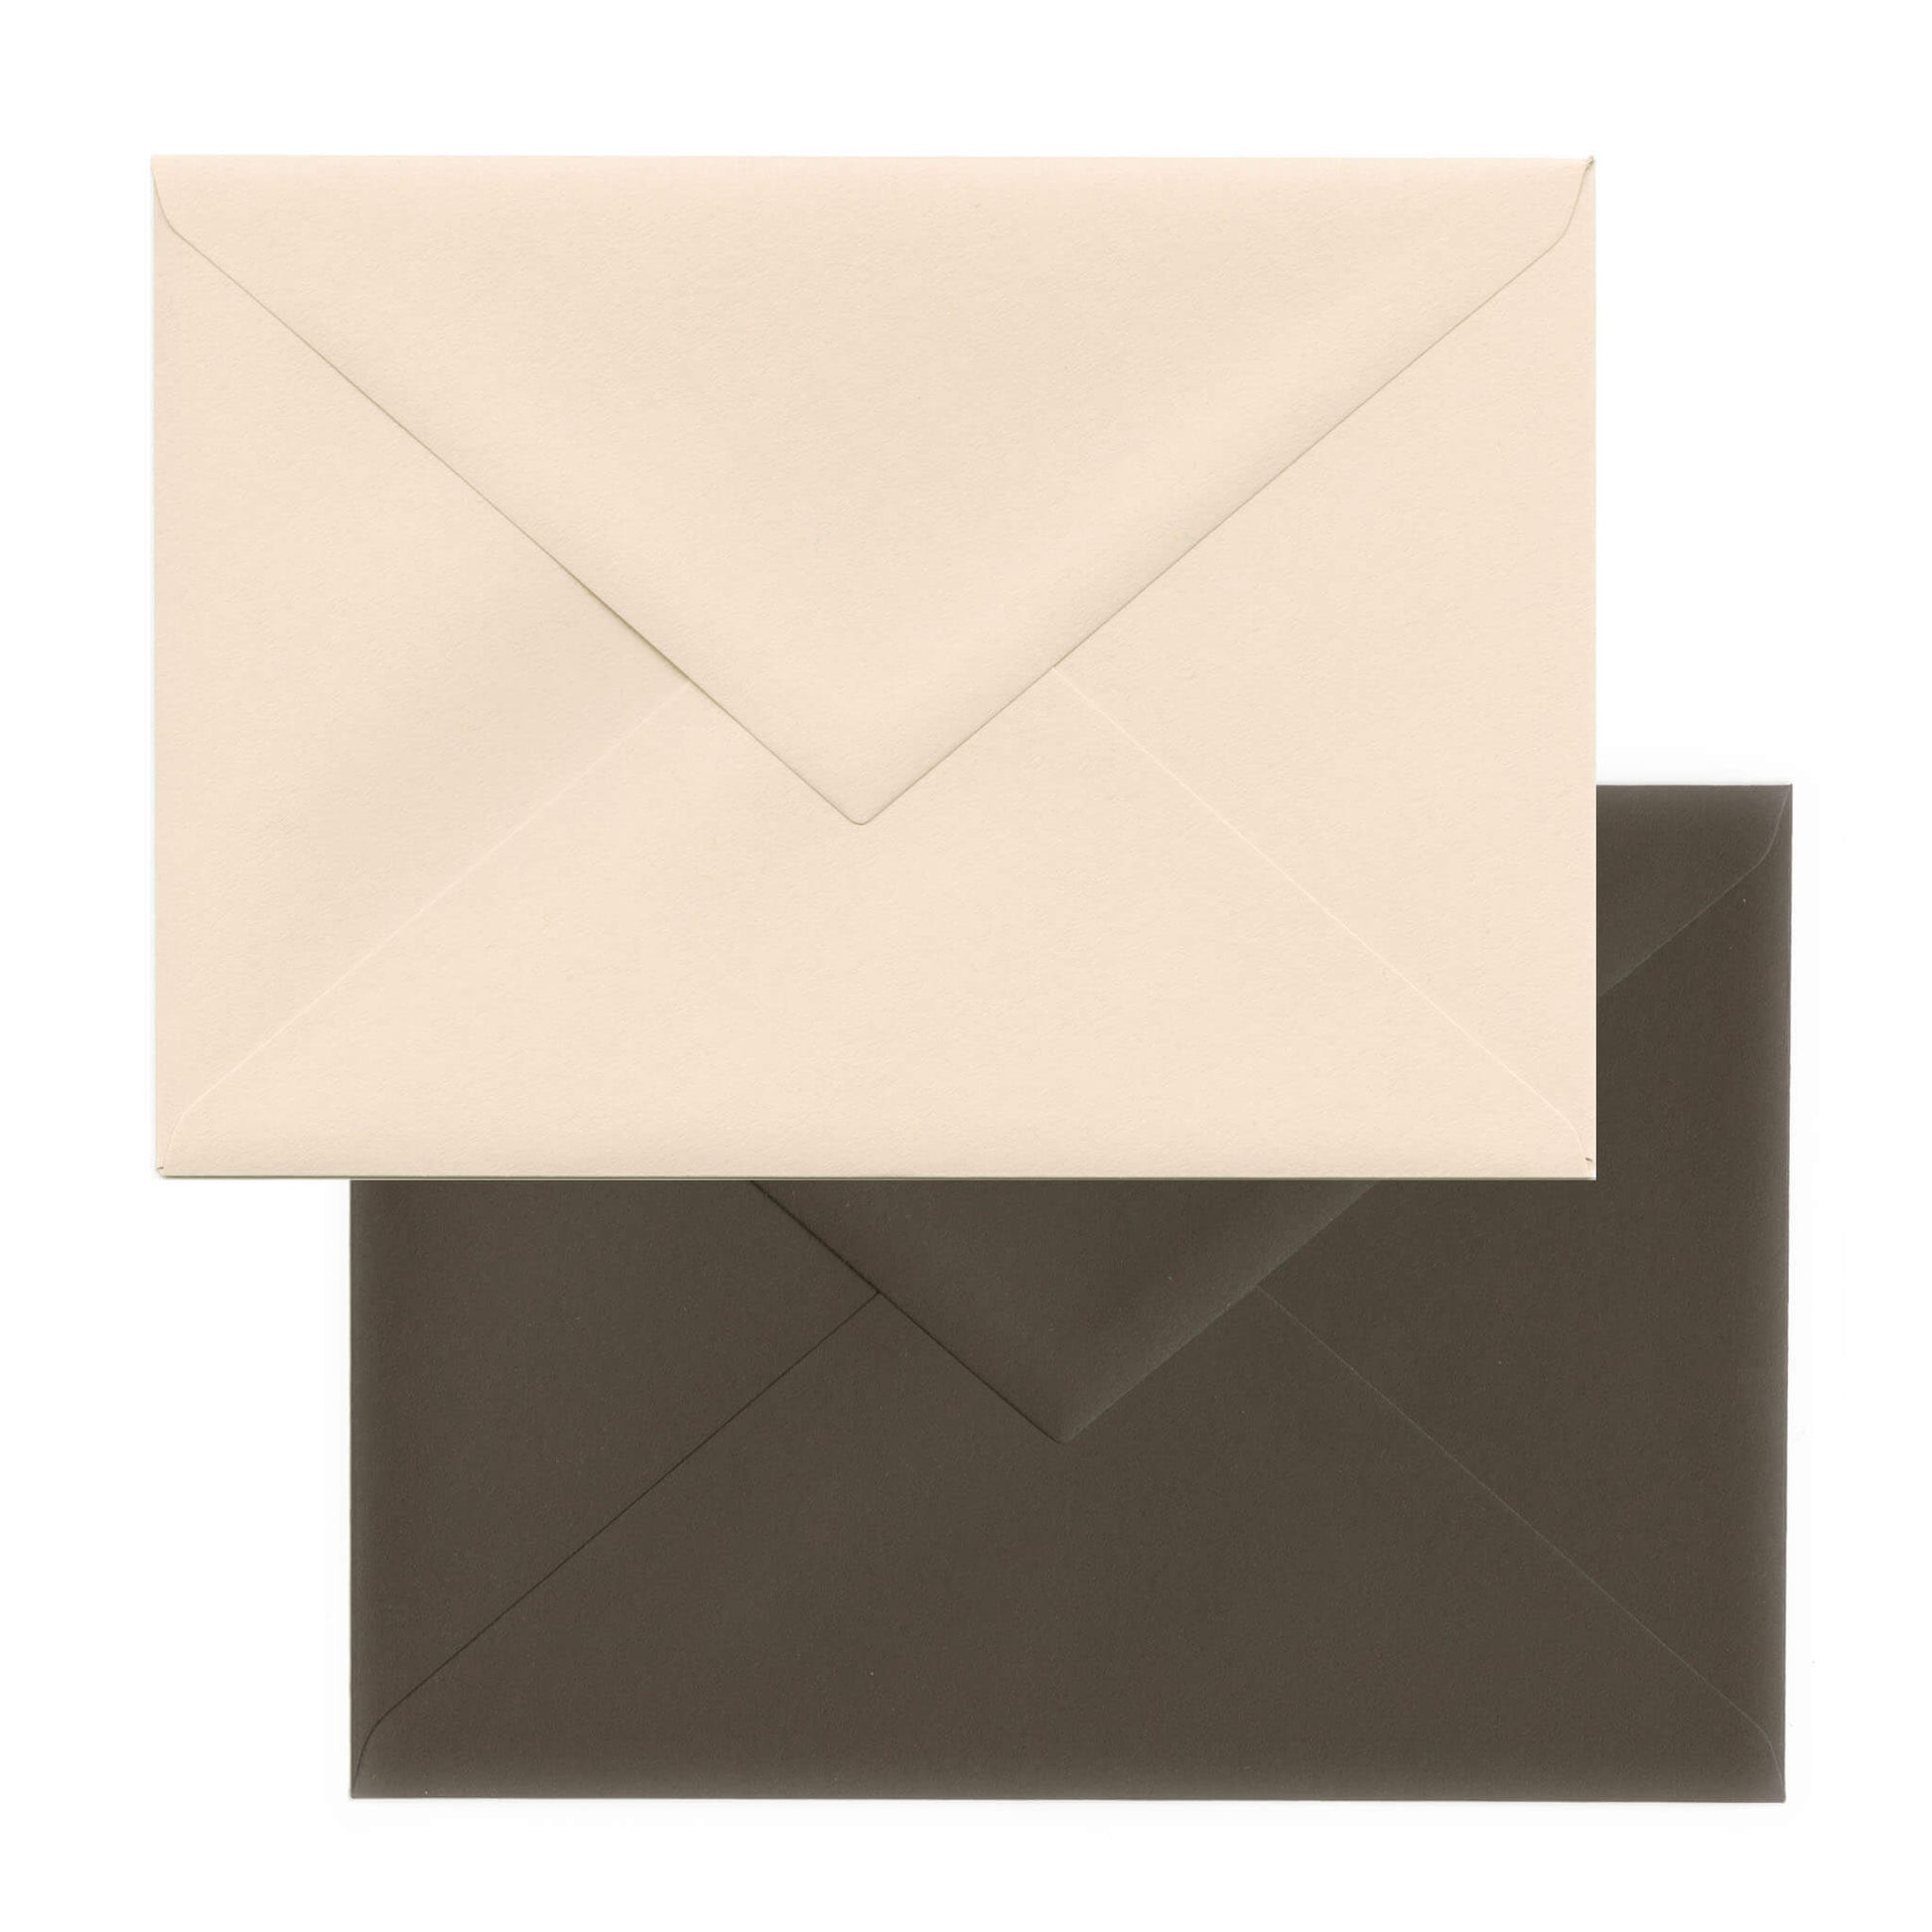 Two envelopes, with the beige one partially overlapping the brown one.